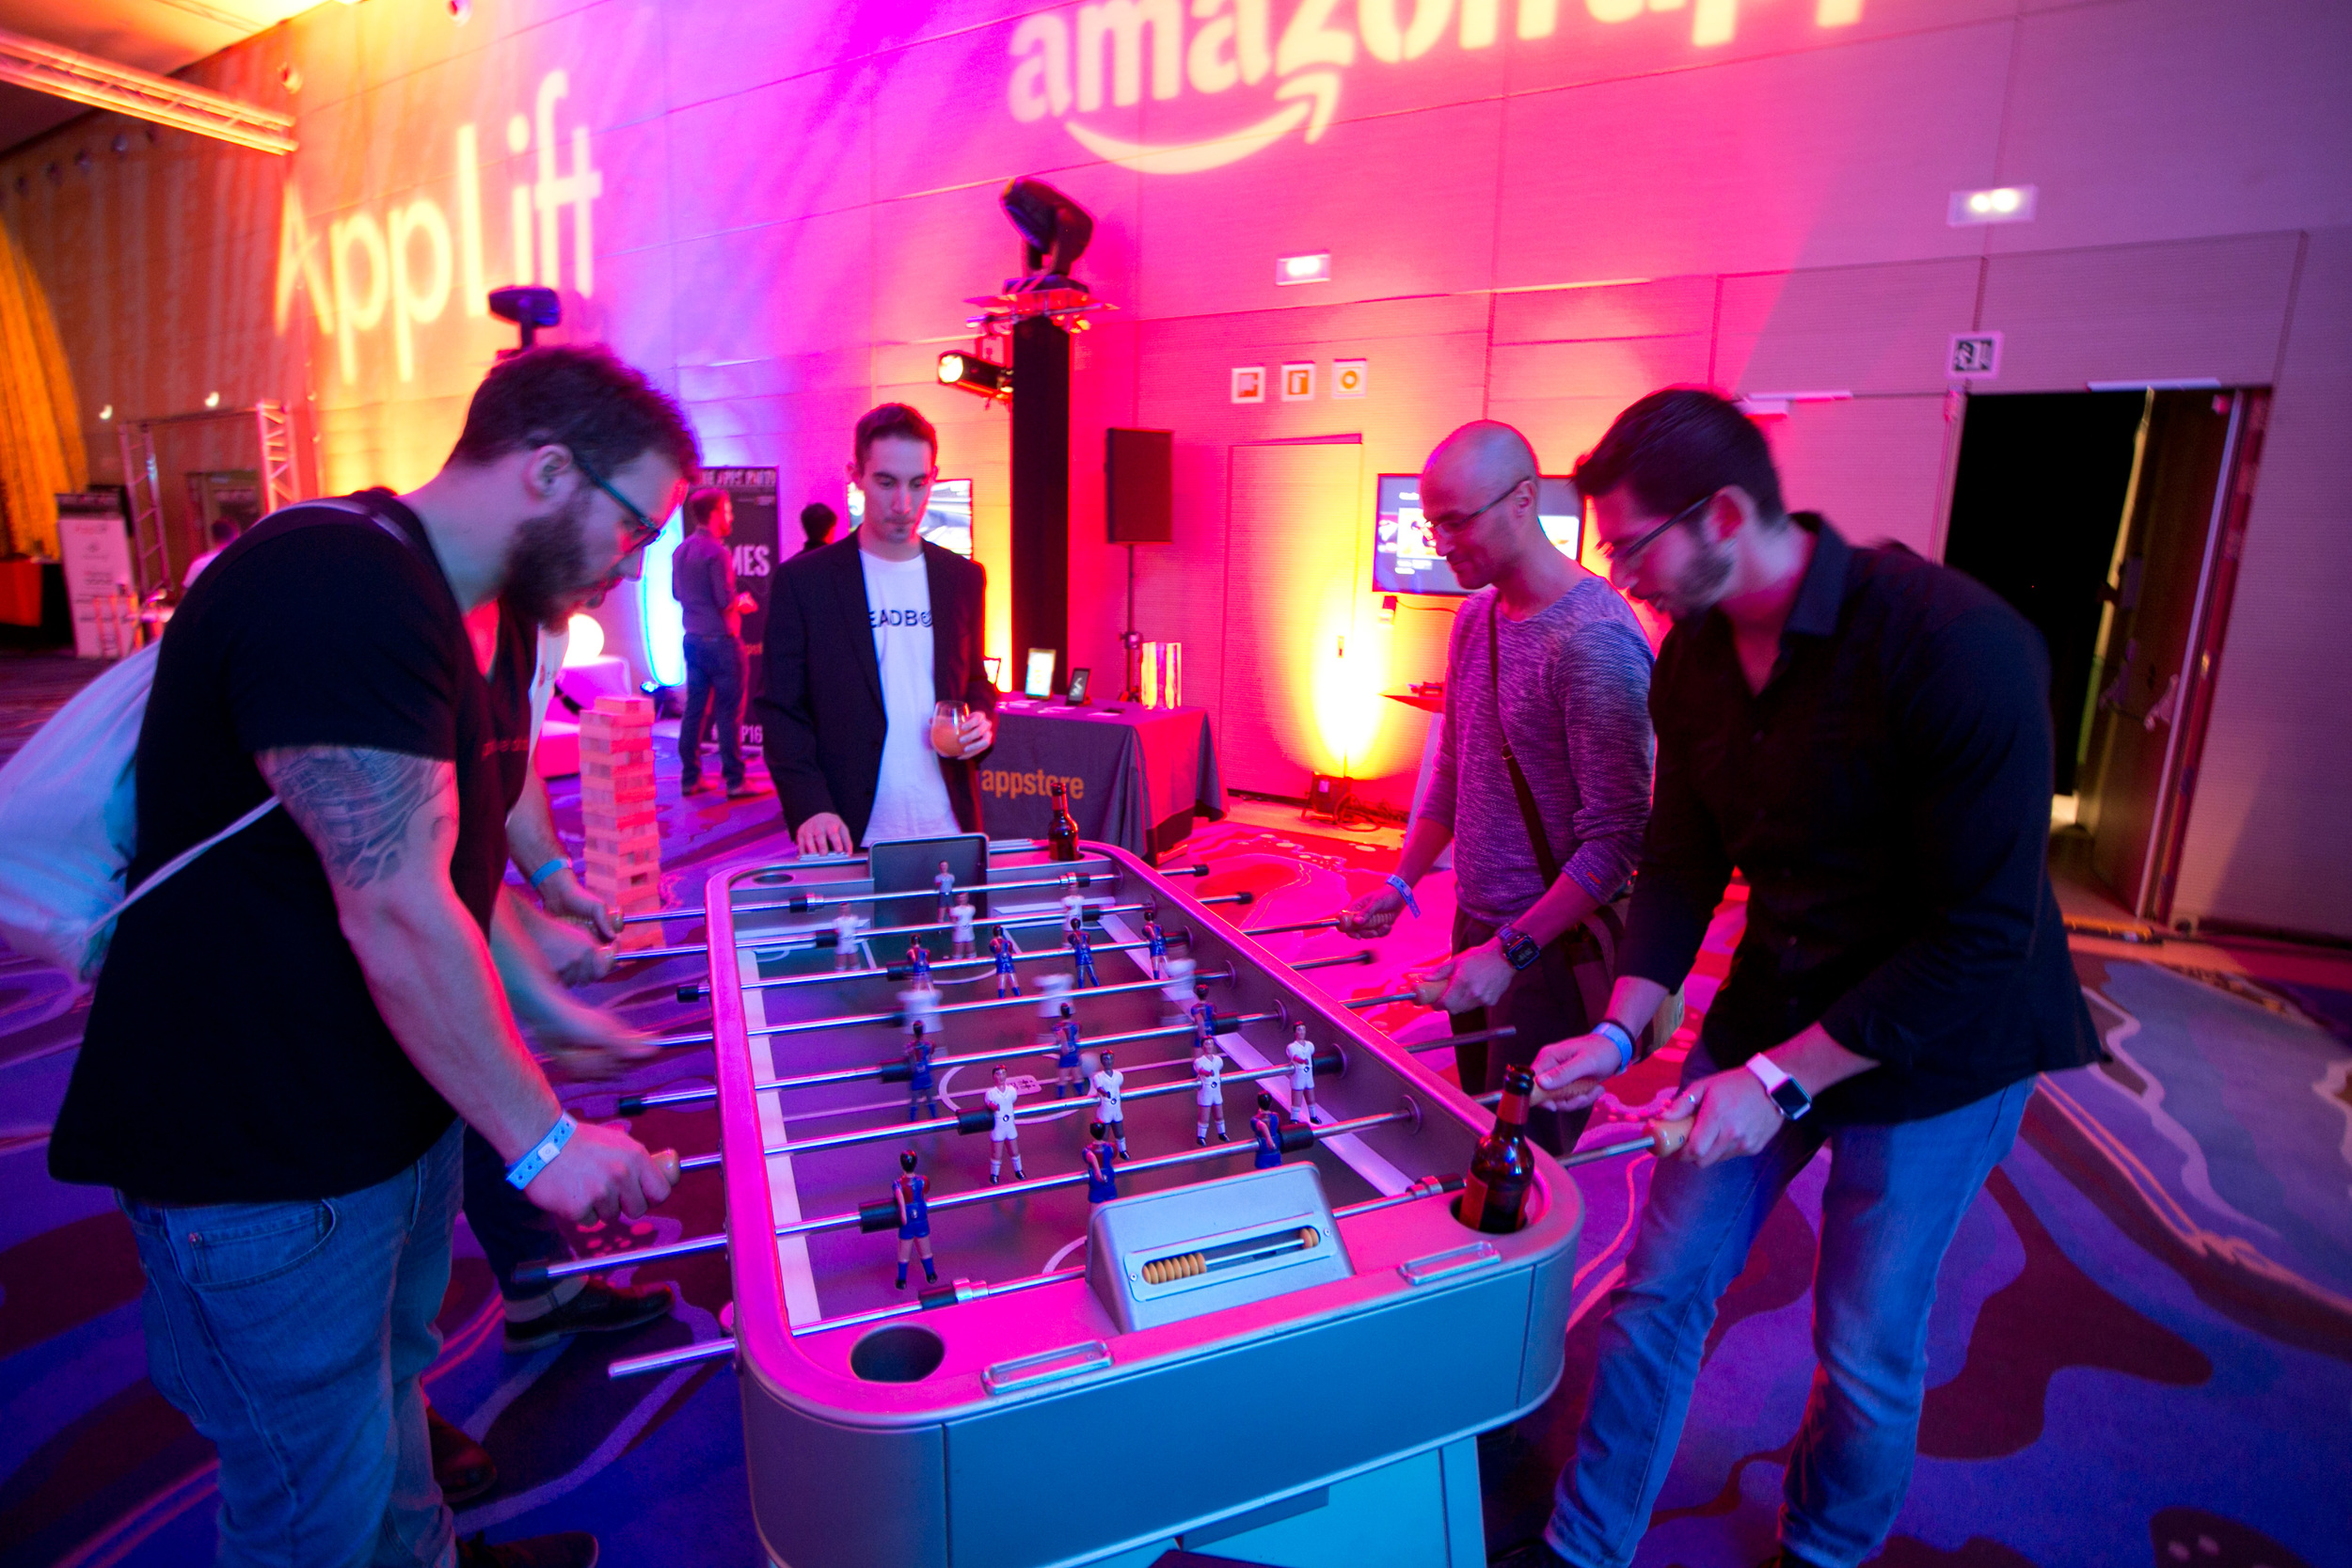 Guests play foosball in the Games area